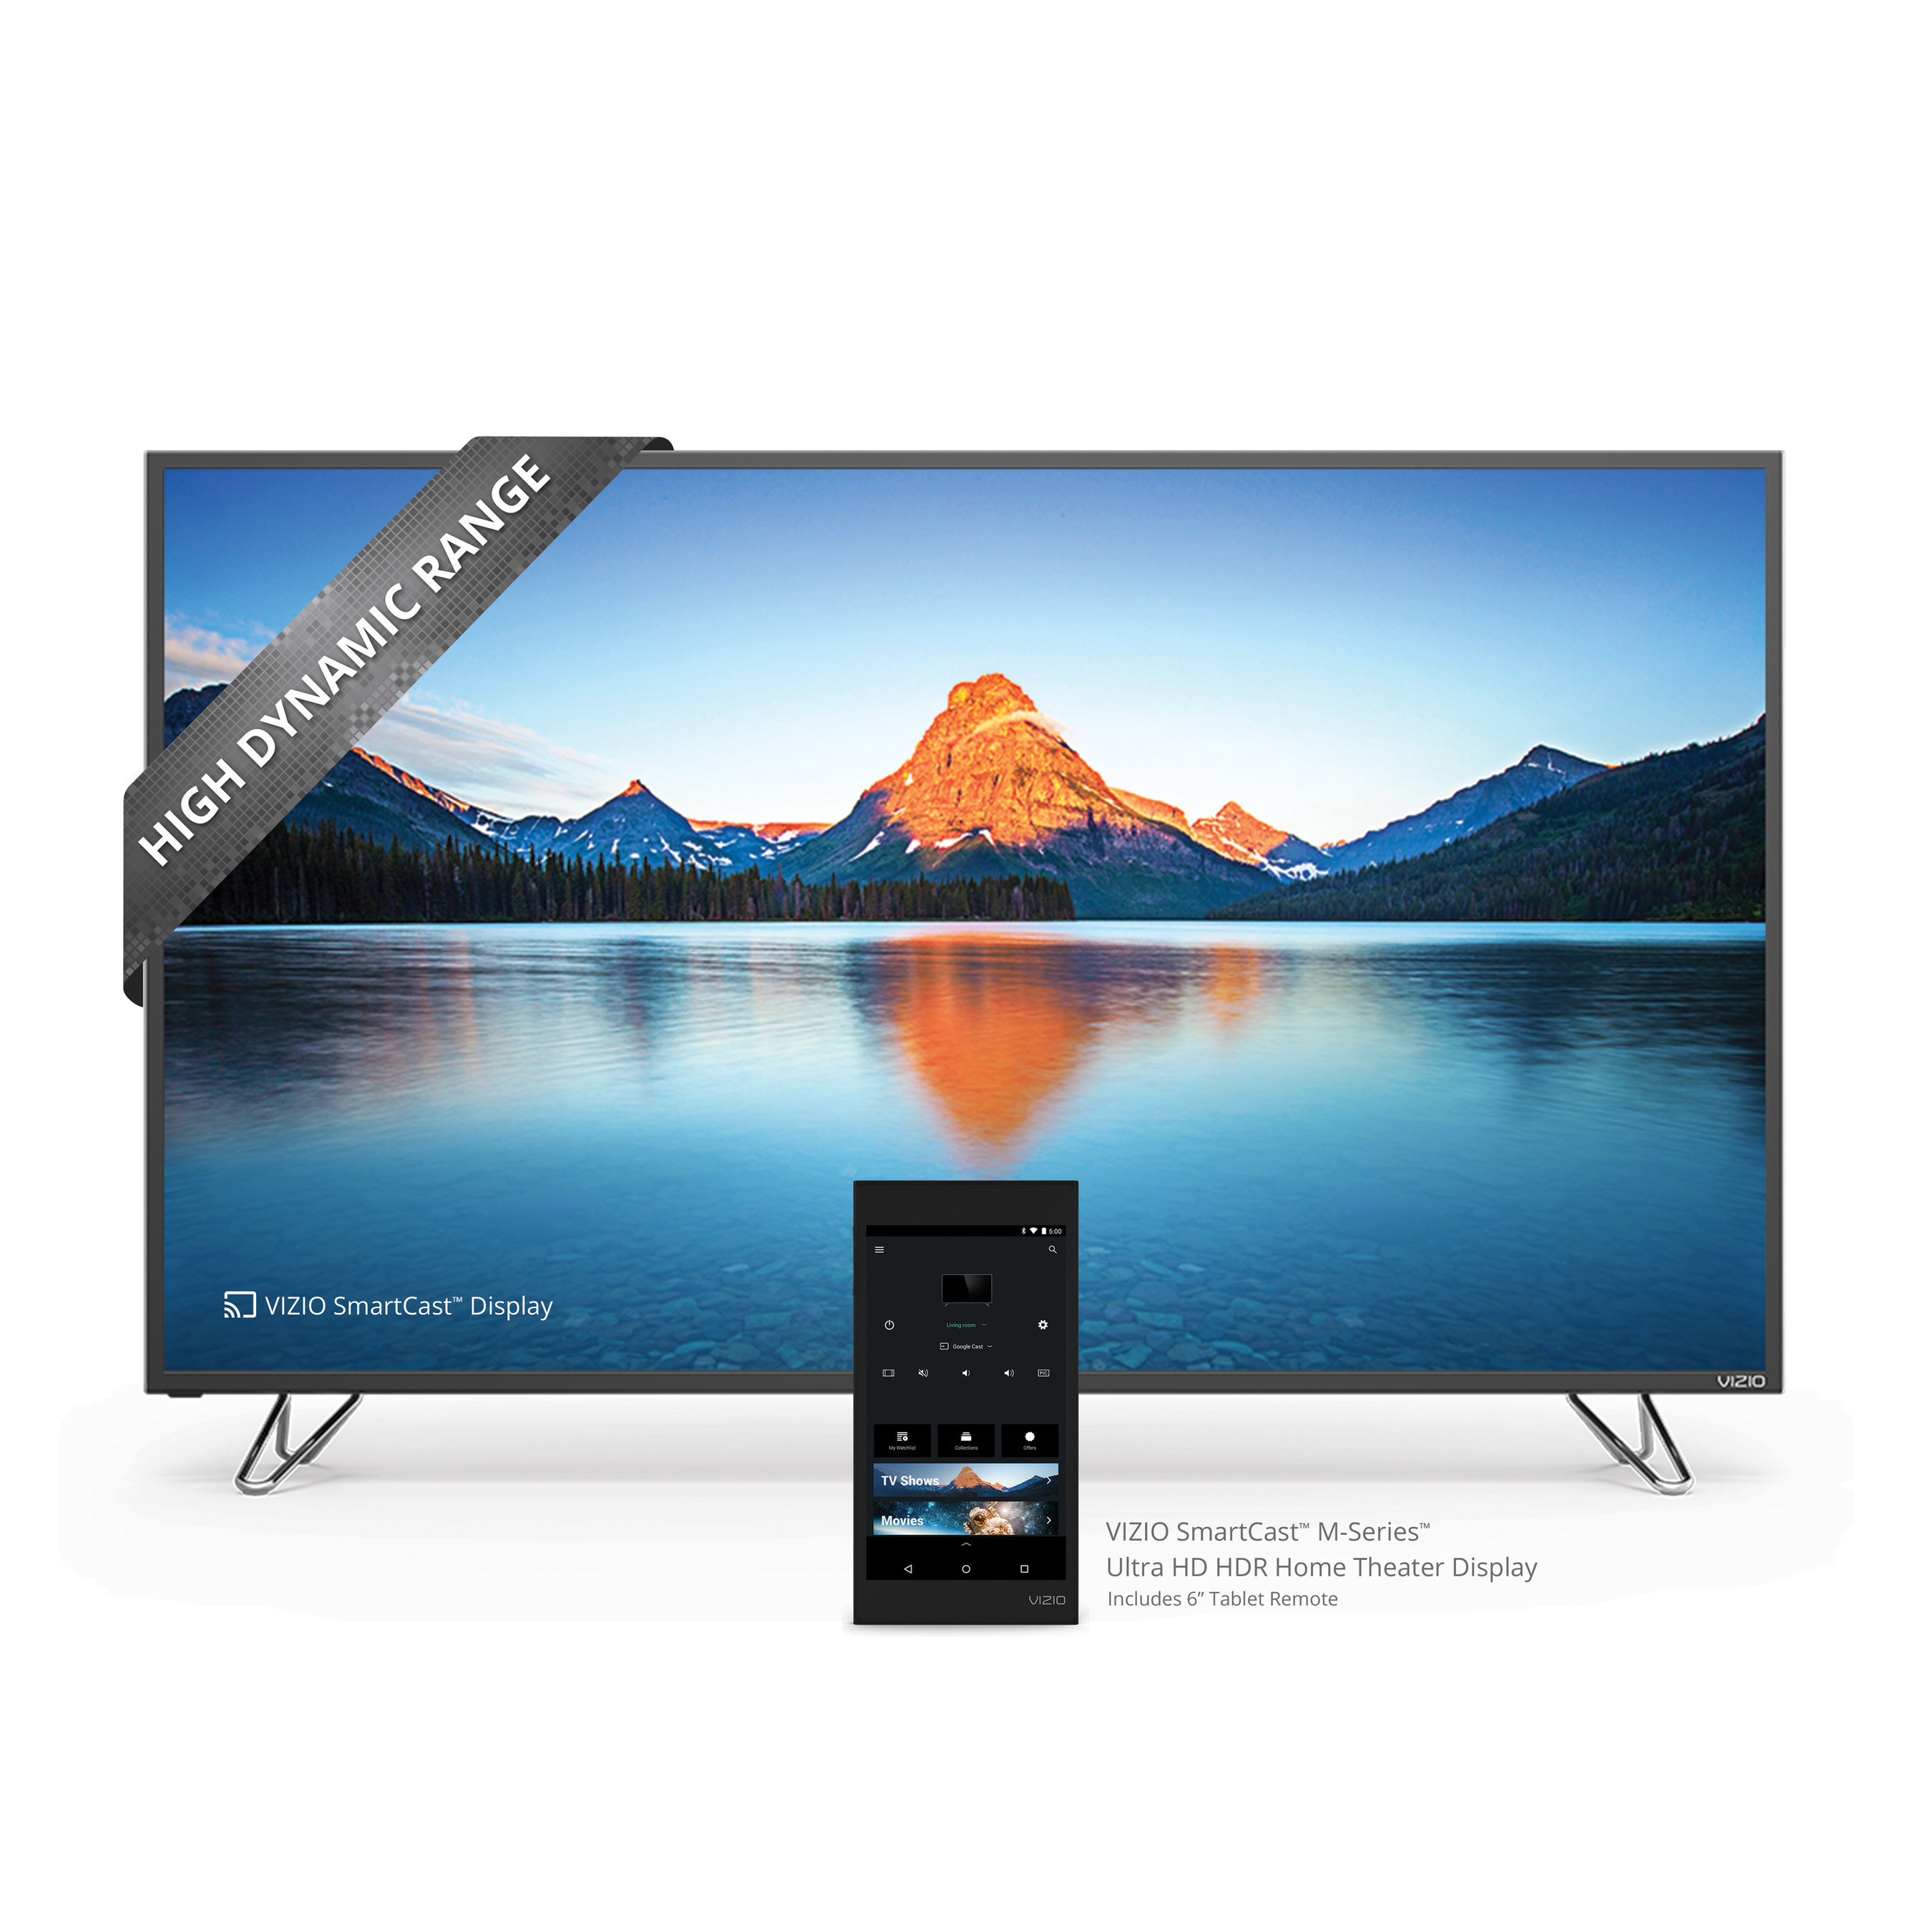 VIZIO Expands Next Generation Smart Entertainment Ecosystem with introduction of All-New VIZIO SmartCast M-Series Ultra HD HDR Home Theater Display. Collection Offers Ultra HD Featuring High Dynamic Range with Dolby Vision Support and Includes a 6" Tablet Remote for Best-In-Class Entertainment Experience.